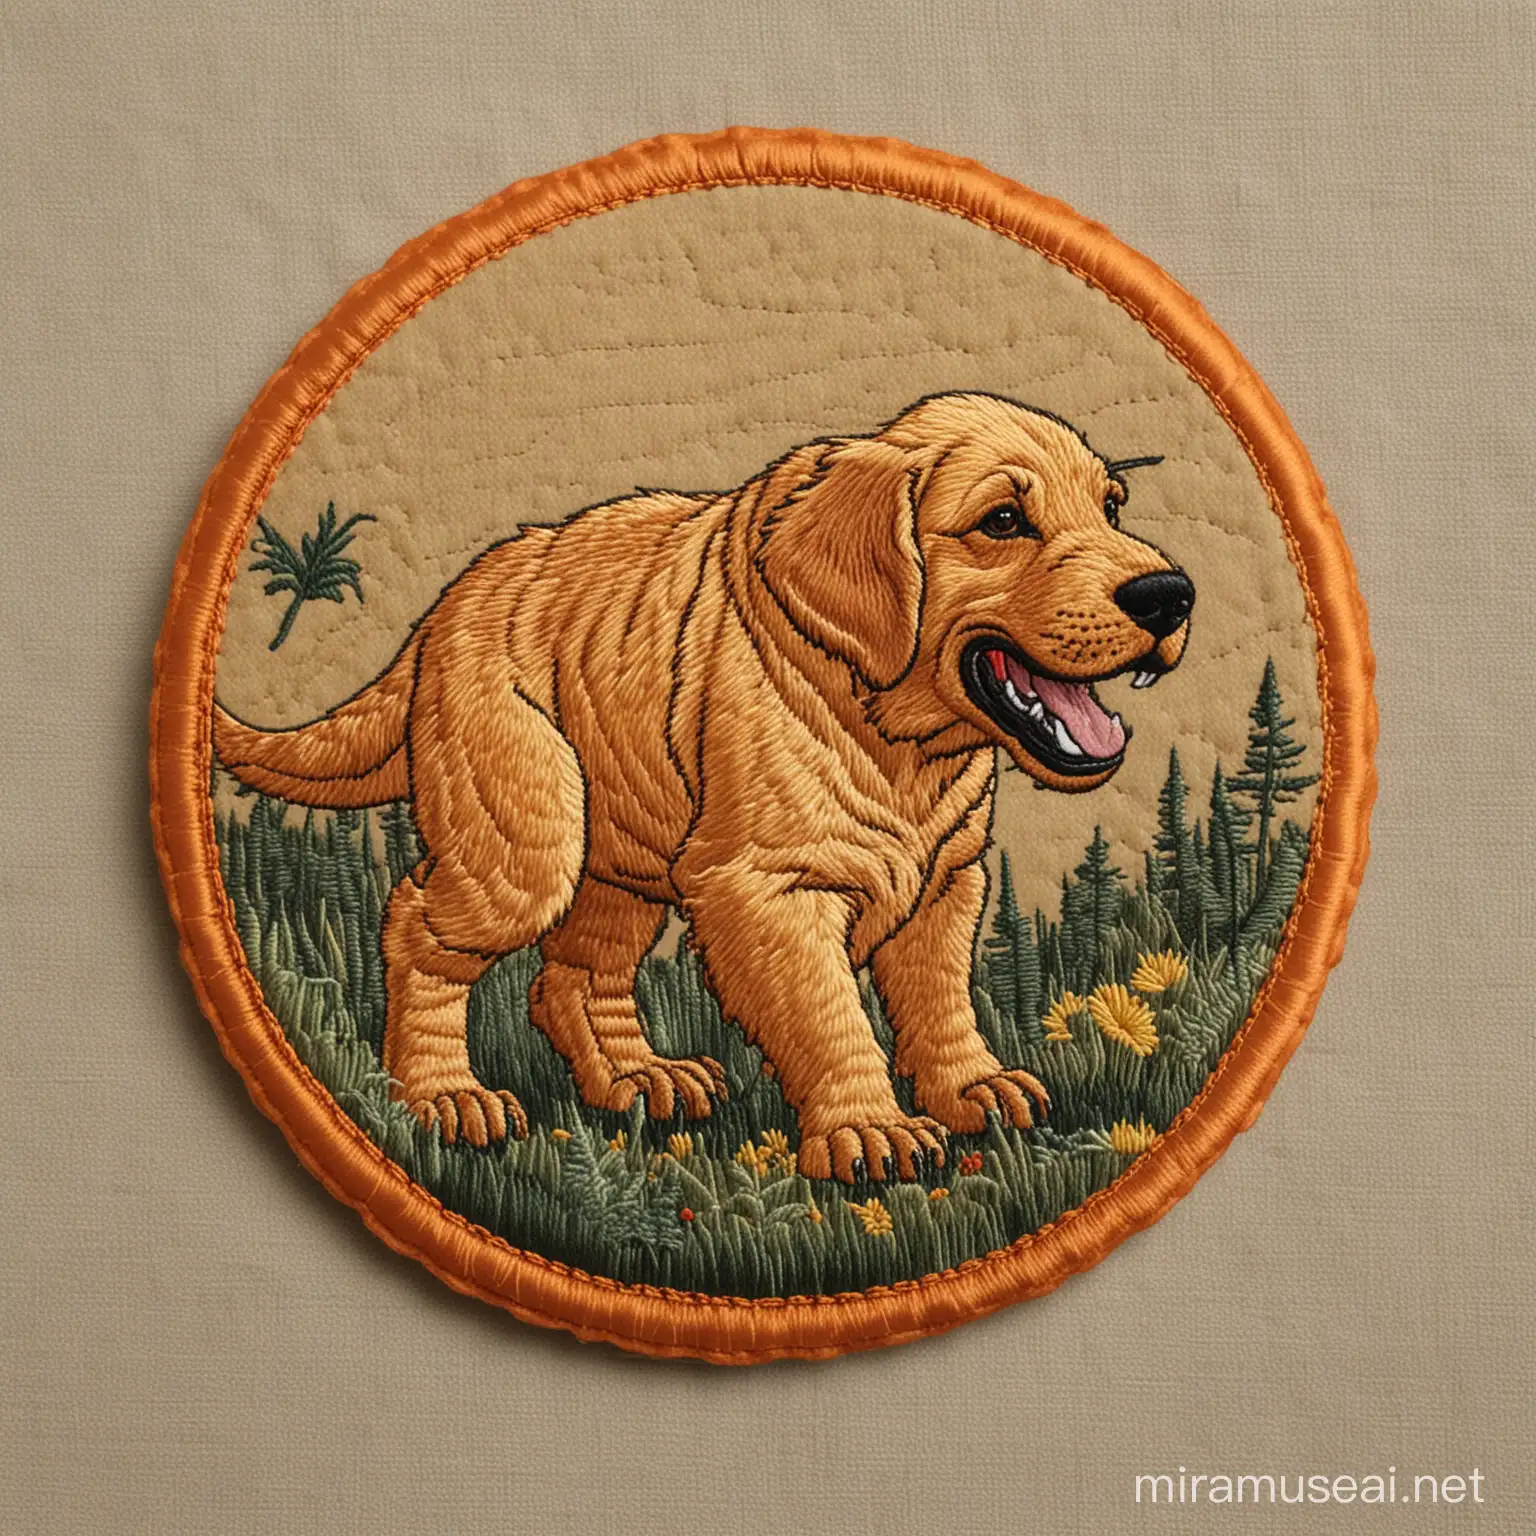 An embroidered patch, a Tyrannosaurus rex mixed with a golden retriever puppy, thick lines, low detail, no shading -- ar 9:11 --v5